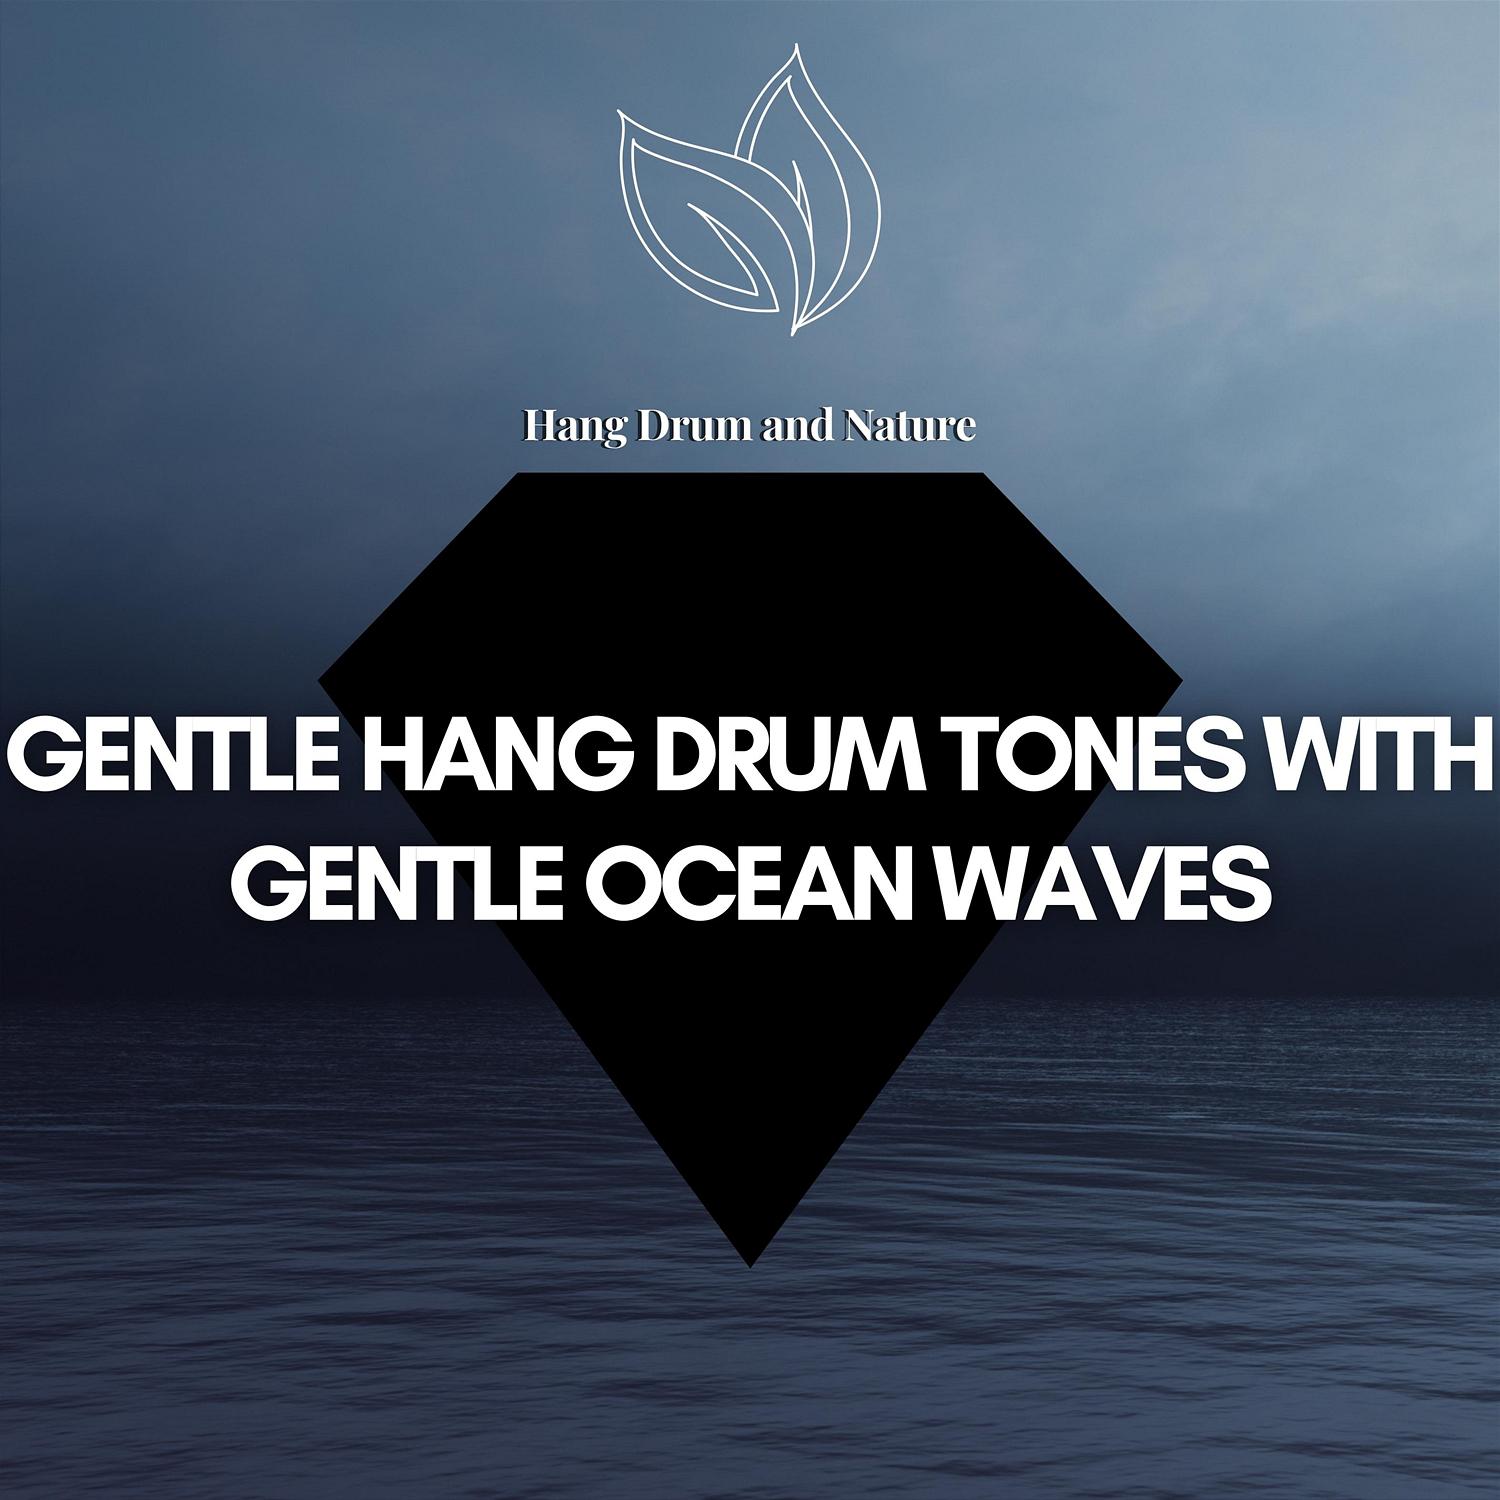 Hang Drum - Linear Moments, Waves Sound